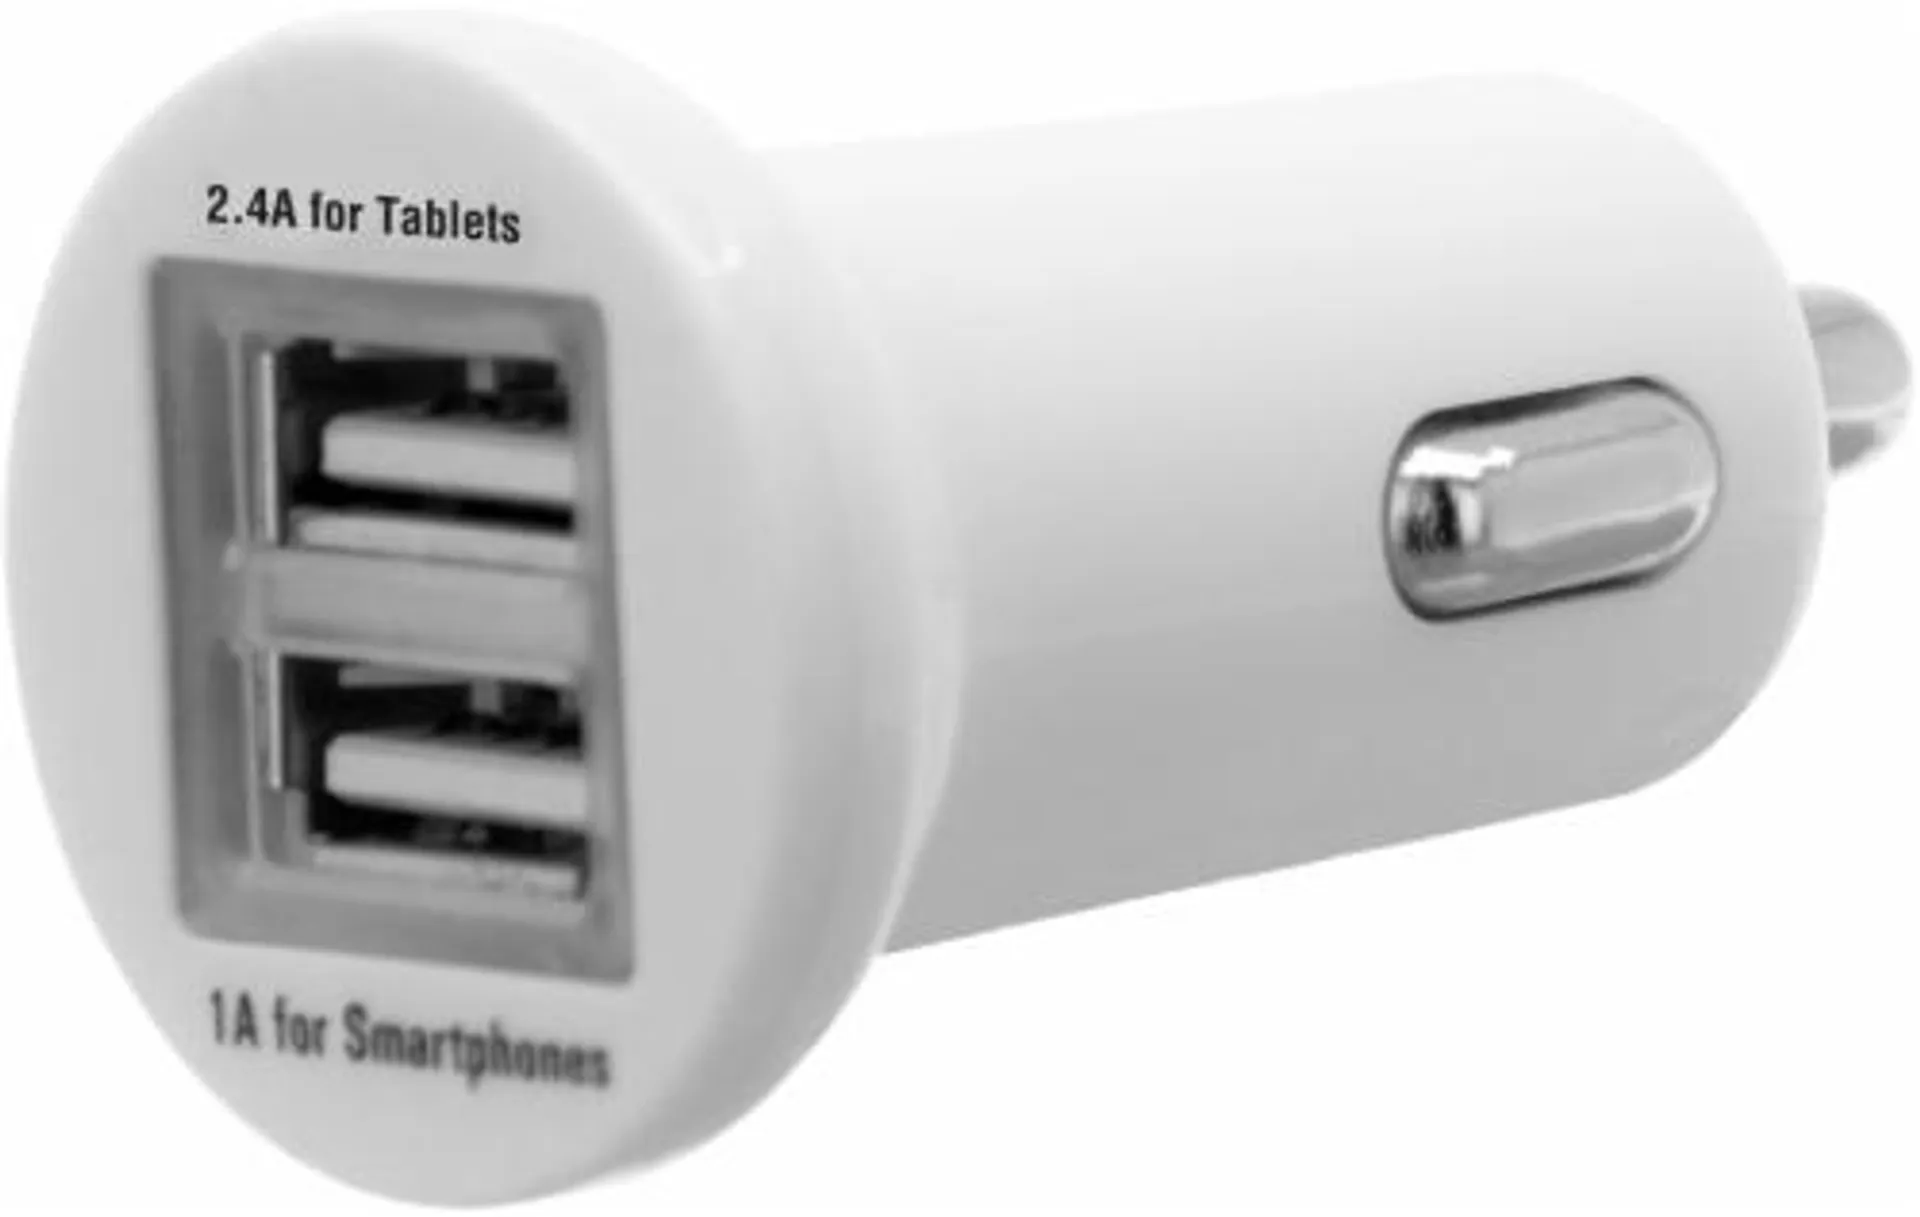 CELLCandy High Power Dual USB Wall Charger - White